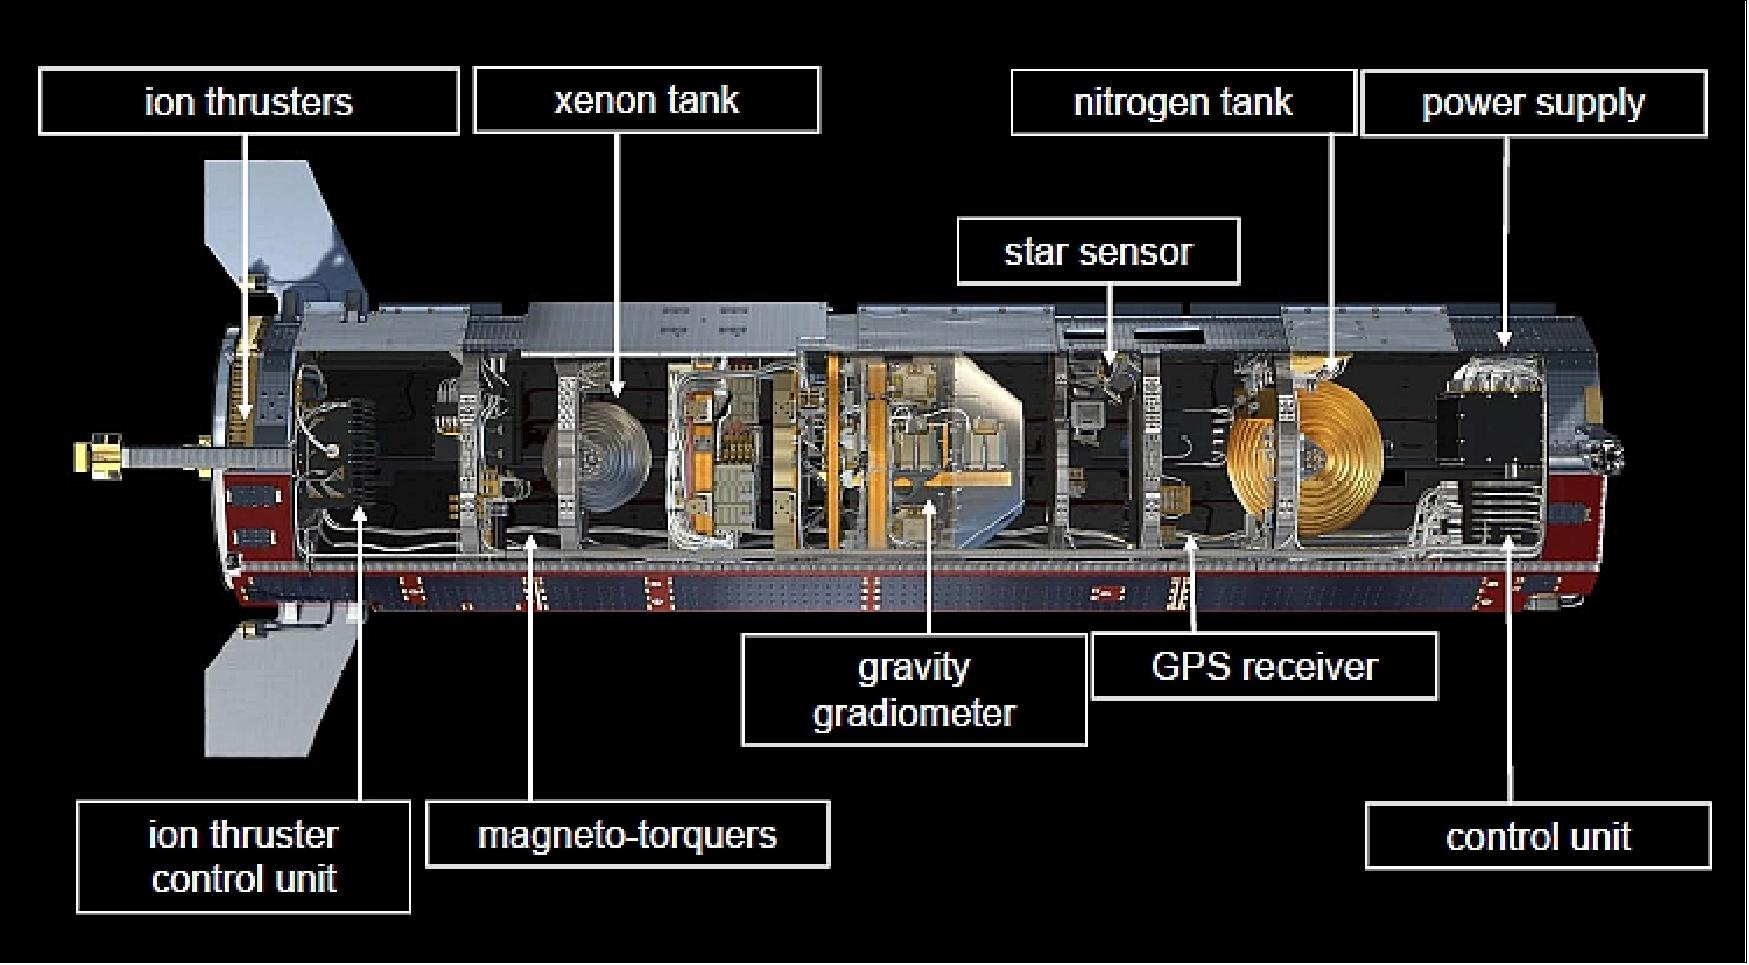 Figure 11: GOCE subsystem accommodation depicting the main components of the spacecraft (image credit: ESA)